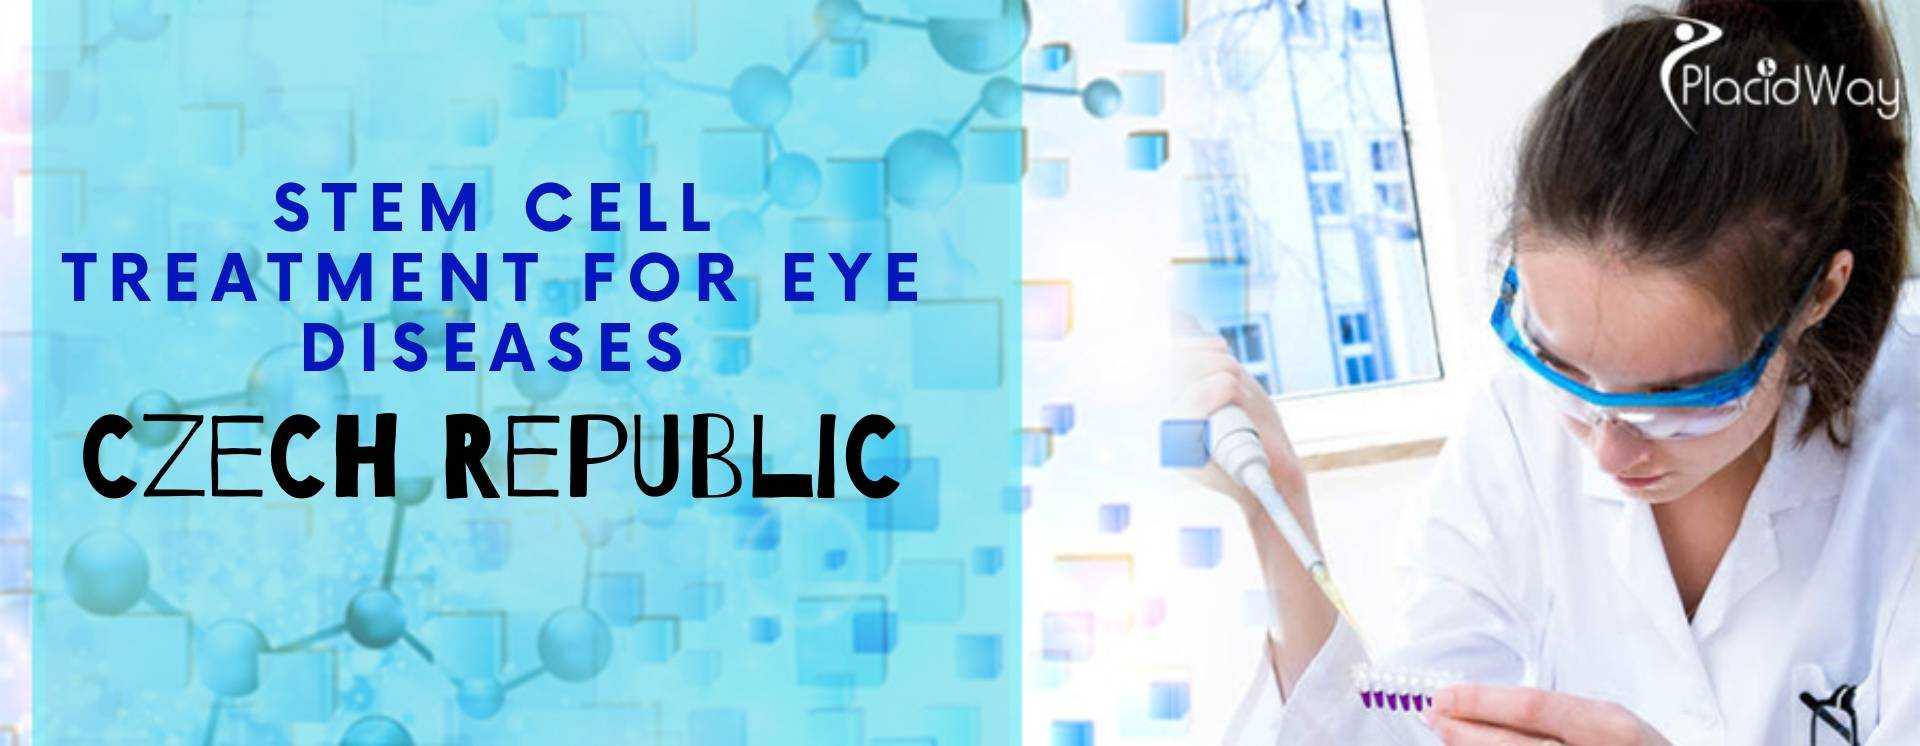 Stem Cell Treatment for Eye Diseases in the Czech Republic